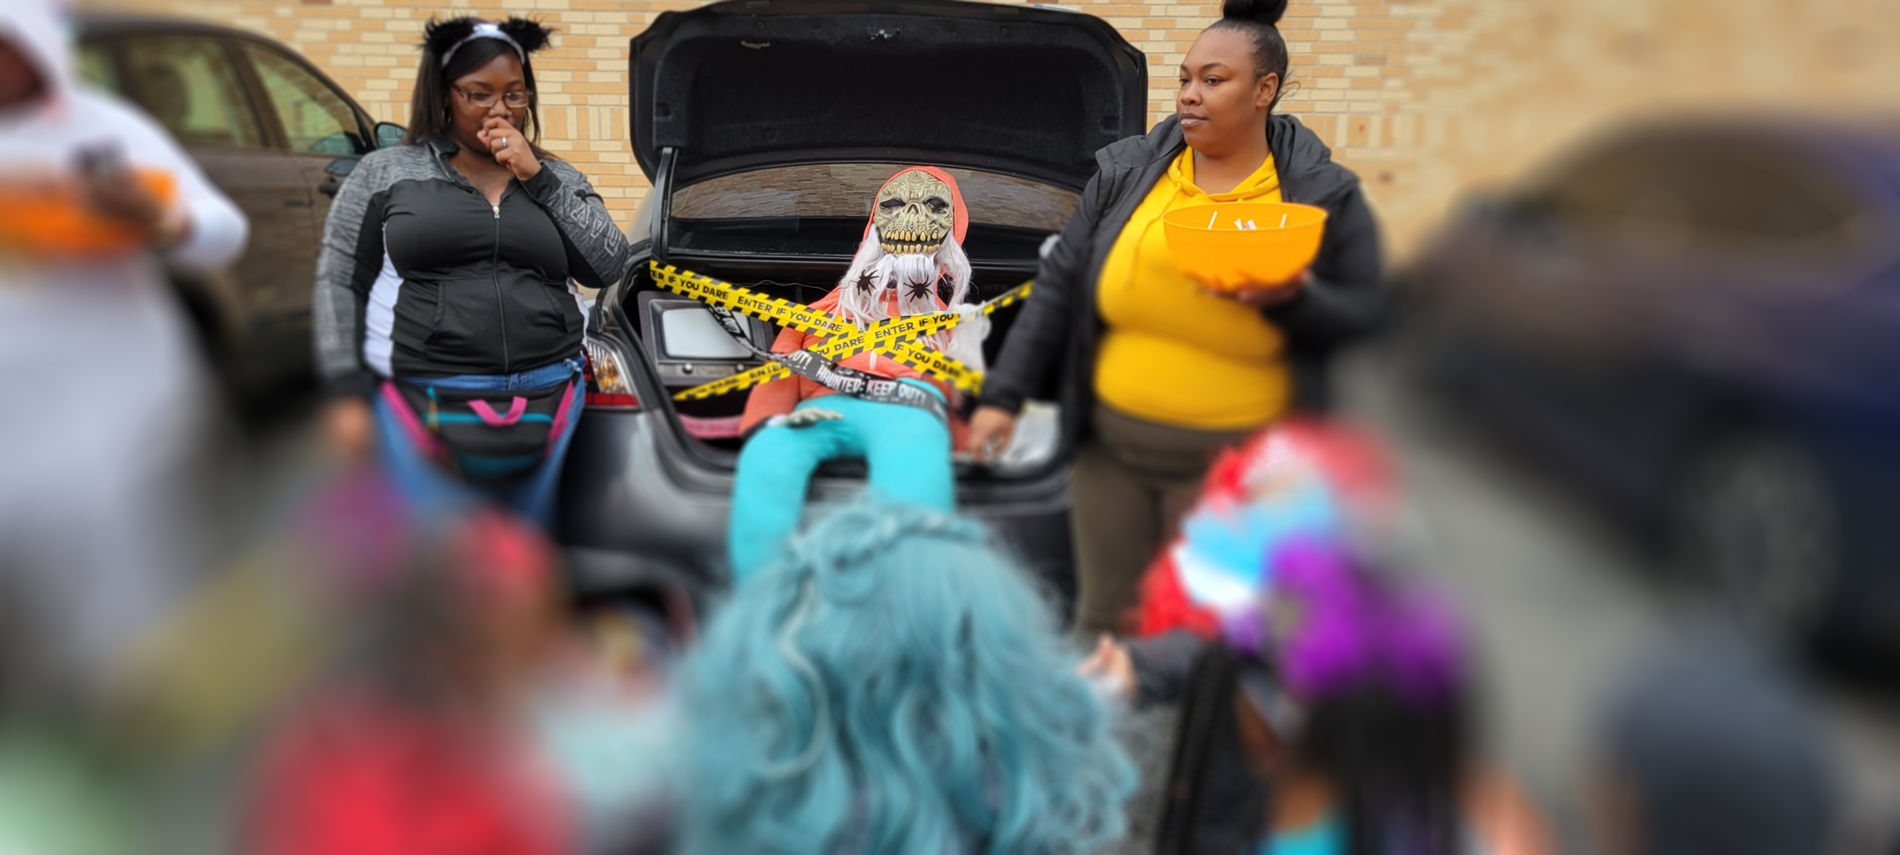 Trunk or treat pictures.  Parents with a plastic skeleton in car